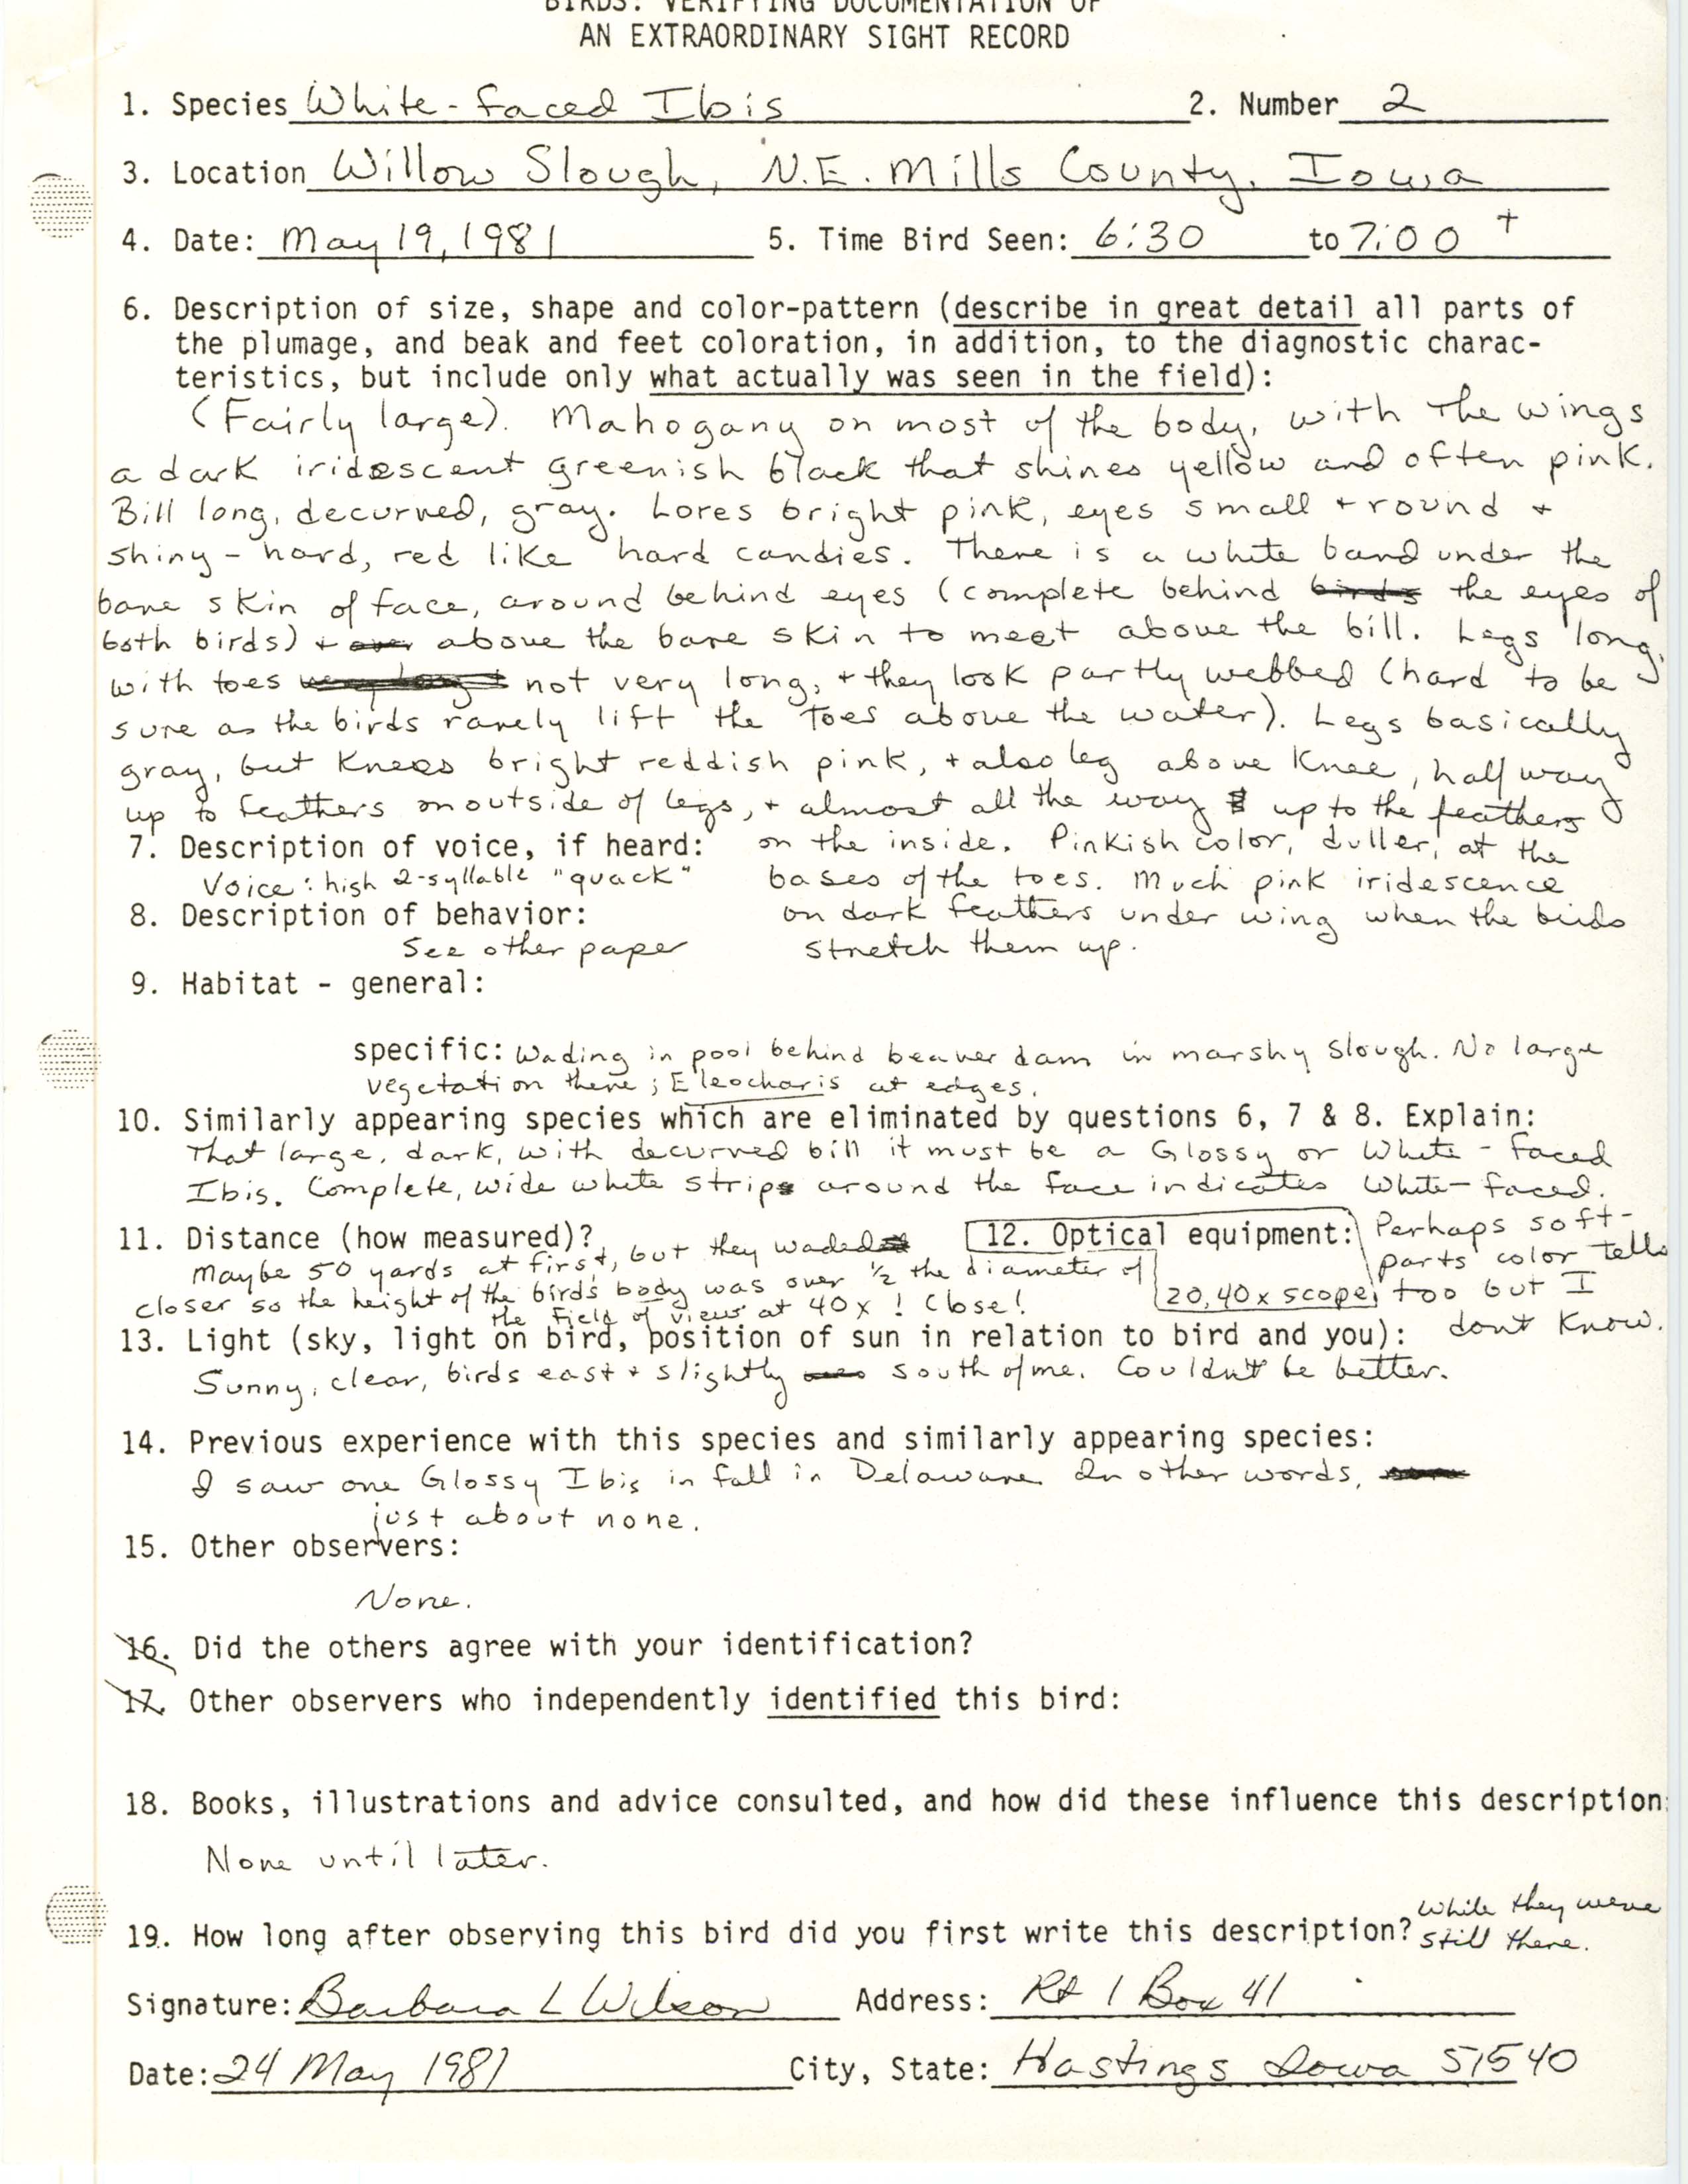 Rare bird documentation form for White-faced Ibis at Willow Slough, 1981